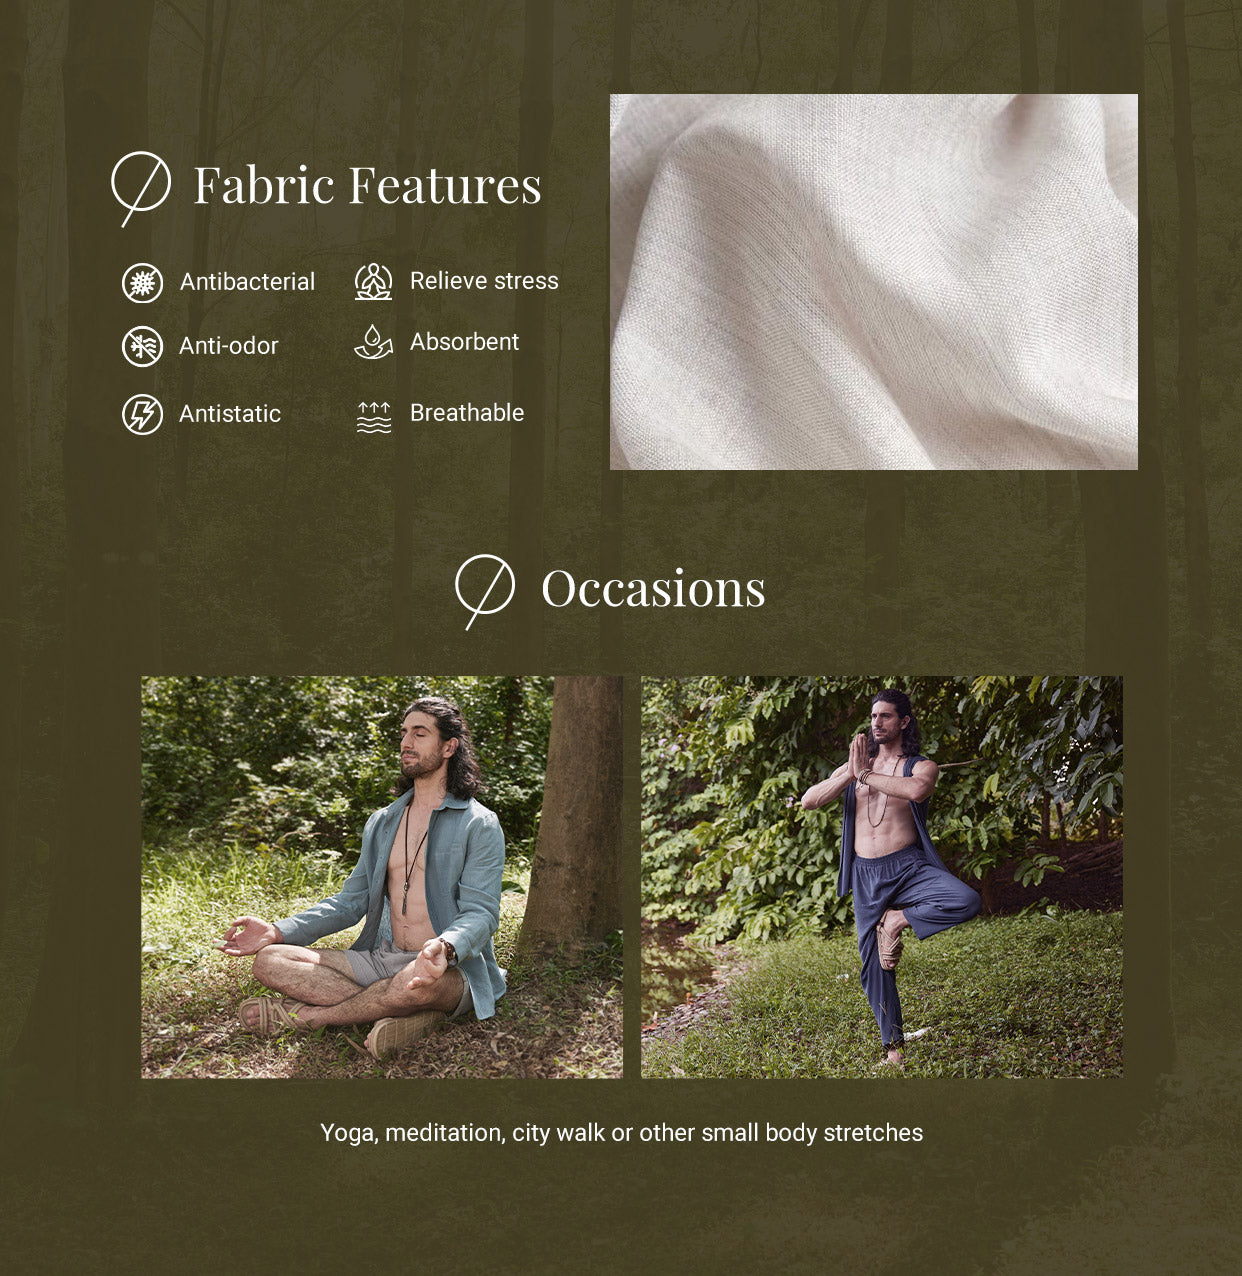 Fabric Features